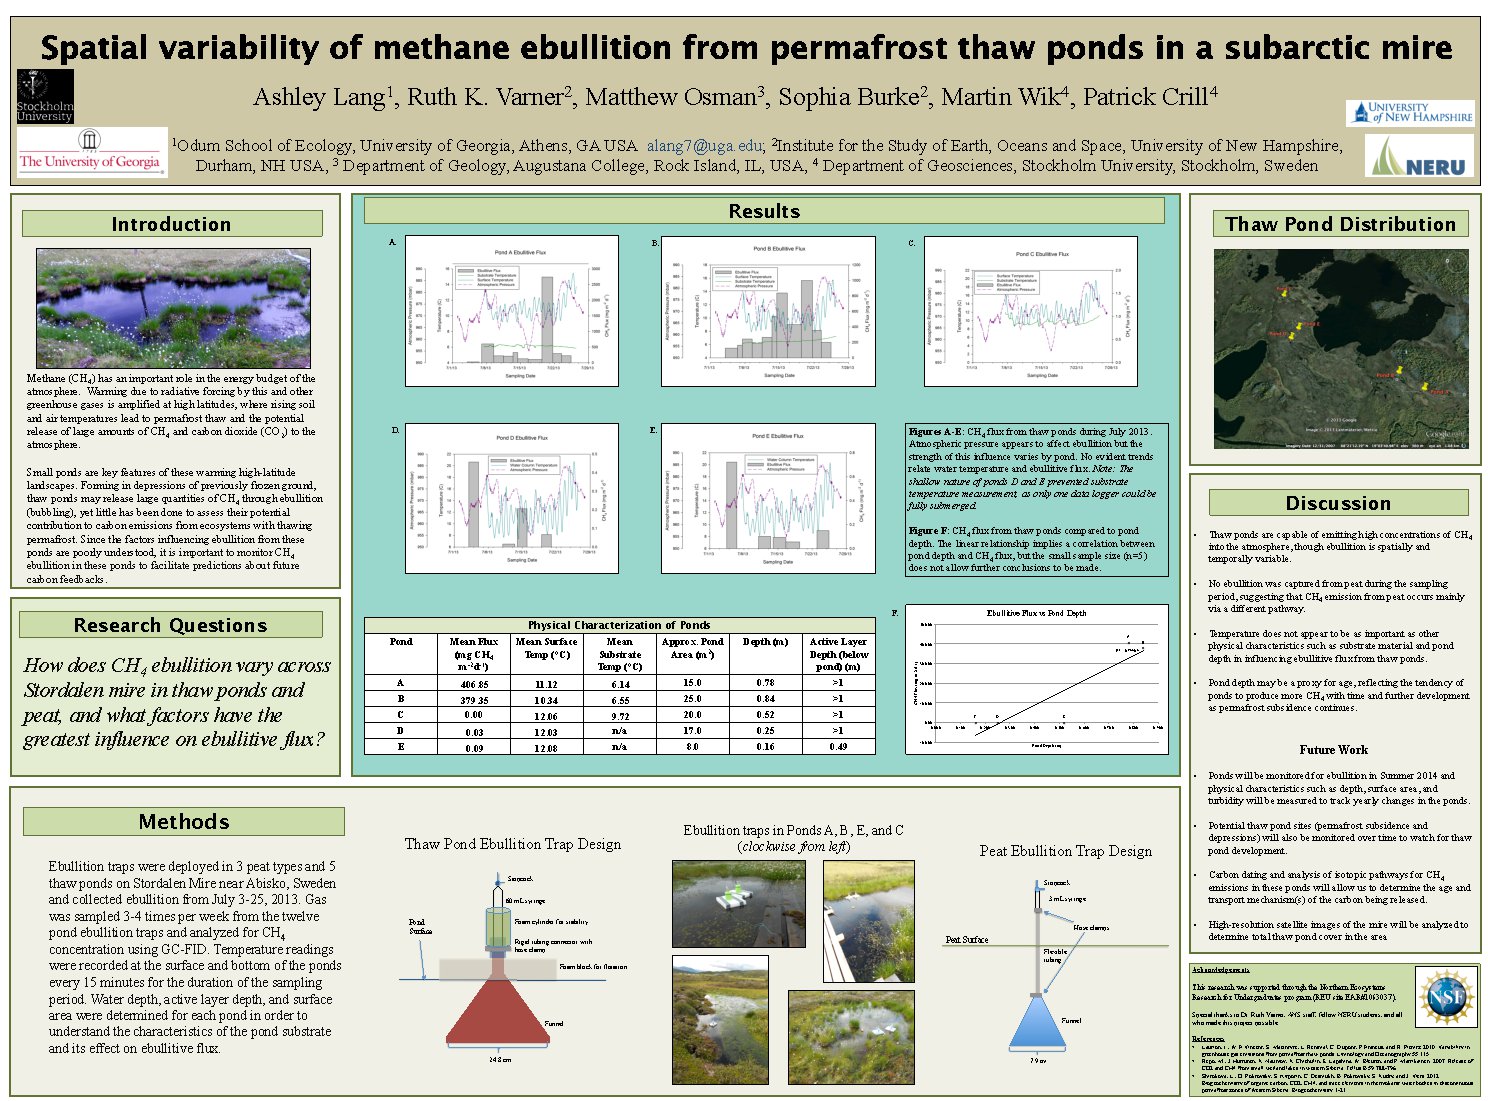 Spatial Variability Of Methane Ebullition From Permafrost Thaw Ponds In A Subarctic Mire by alang7